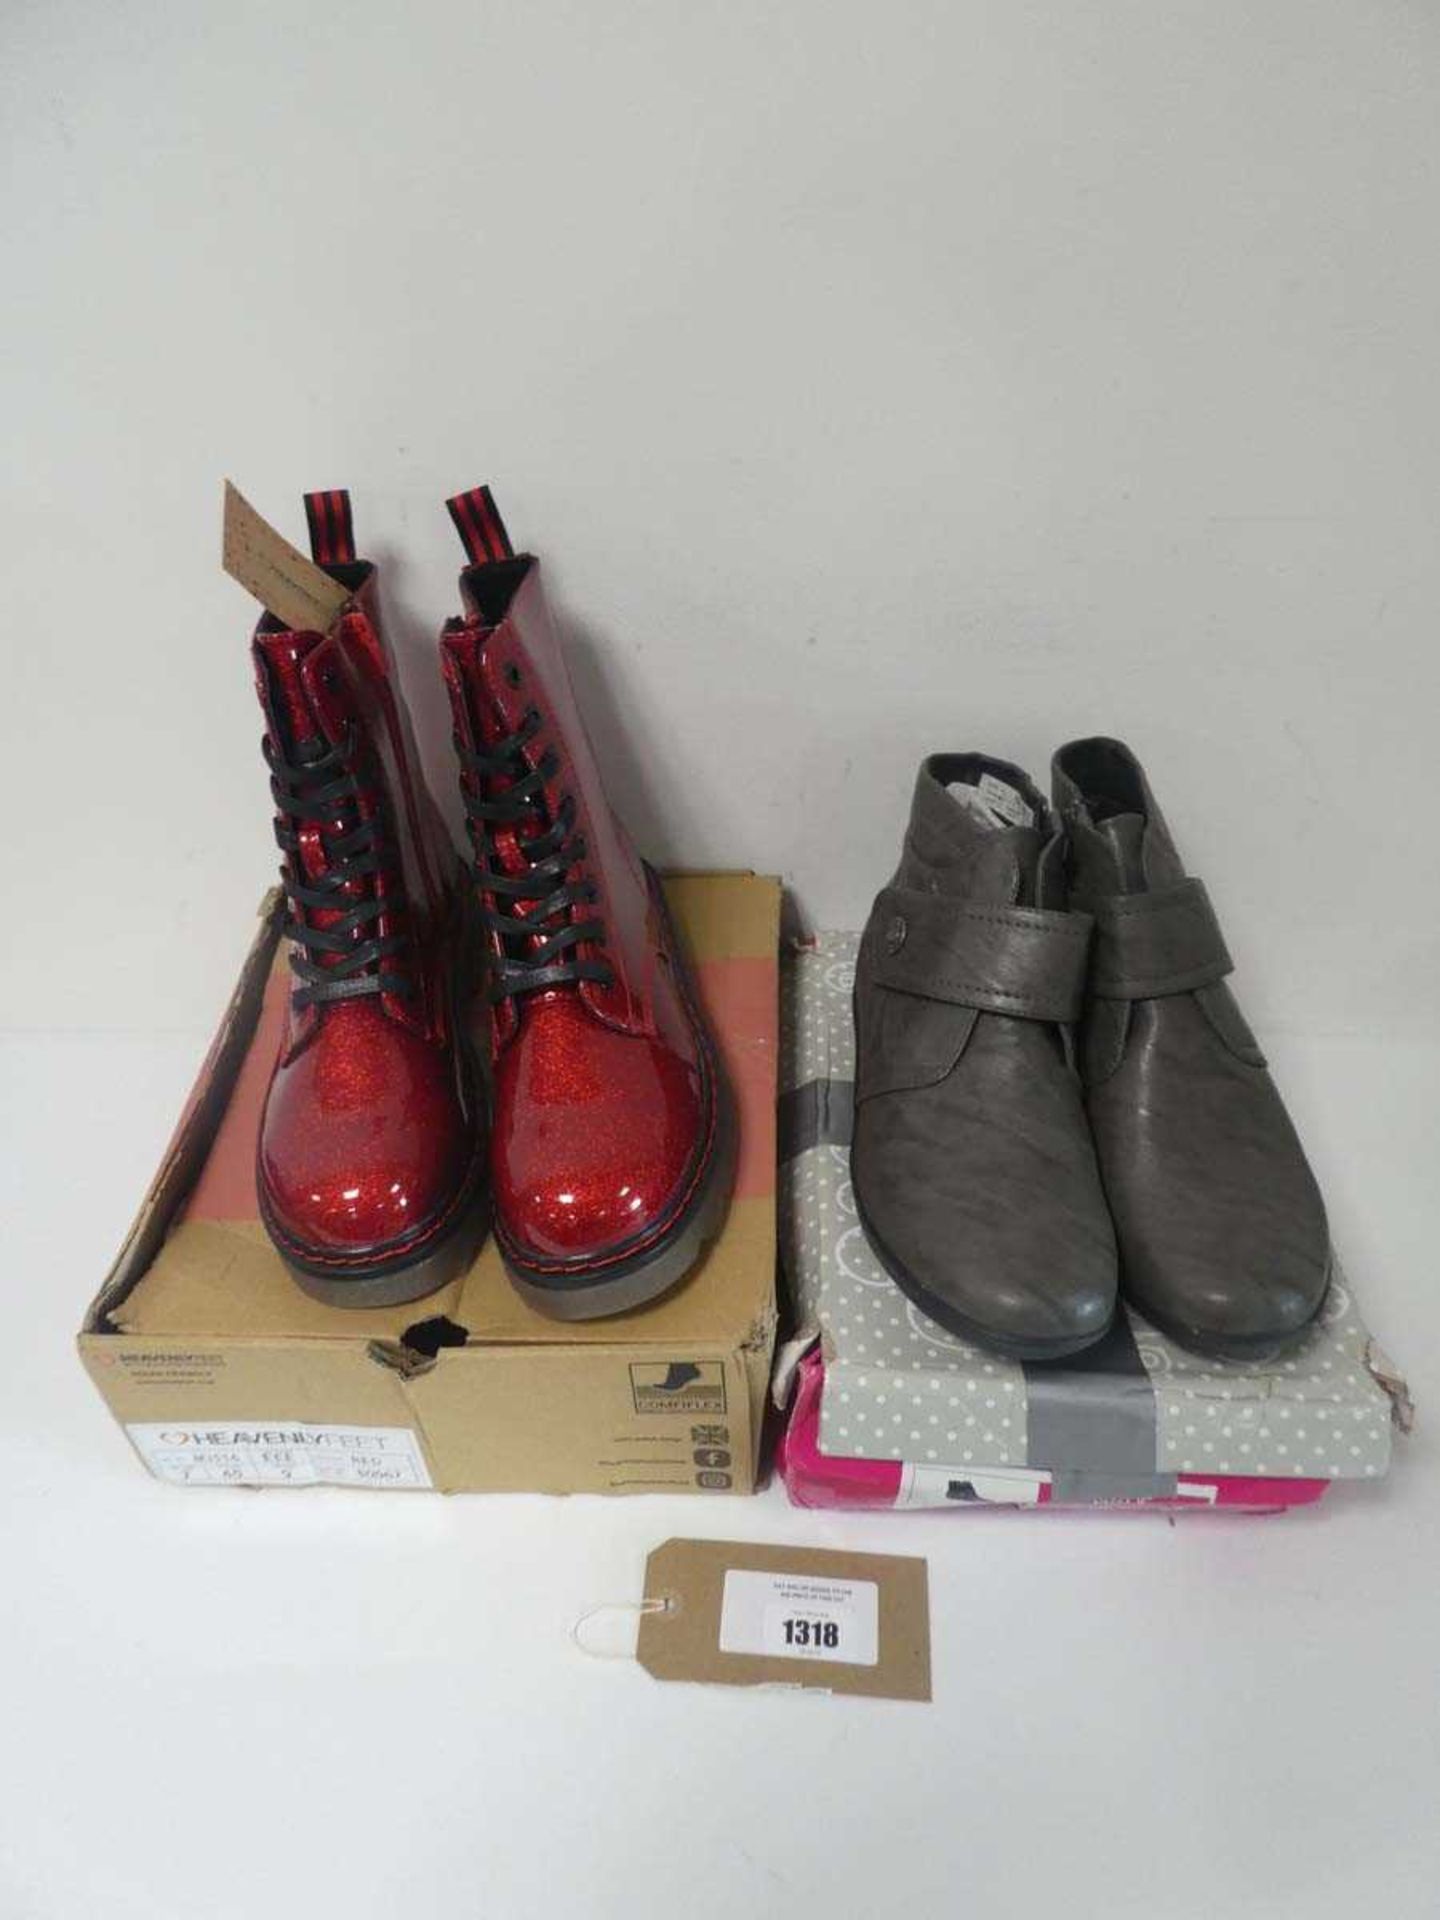 +VAT 2 pairs of boots to include Wide size UK8 and Heavenly feet size UK7 (both boxed)